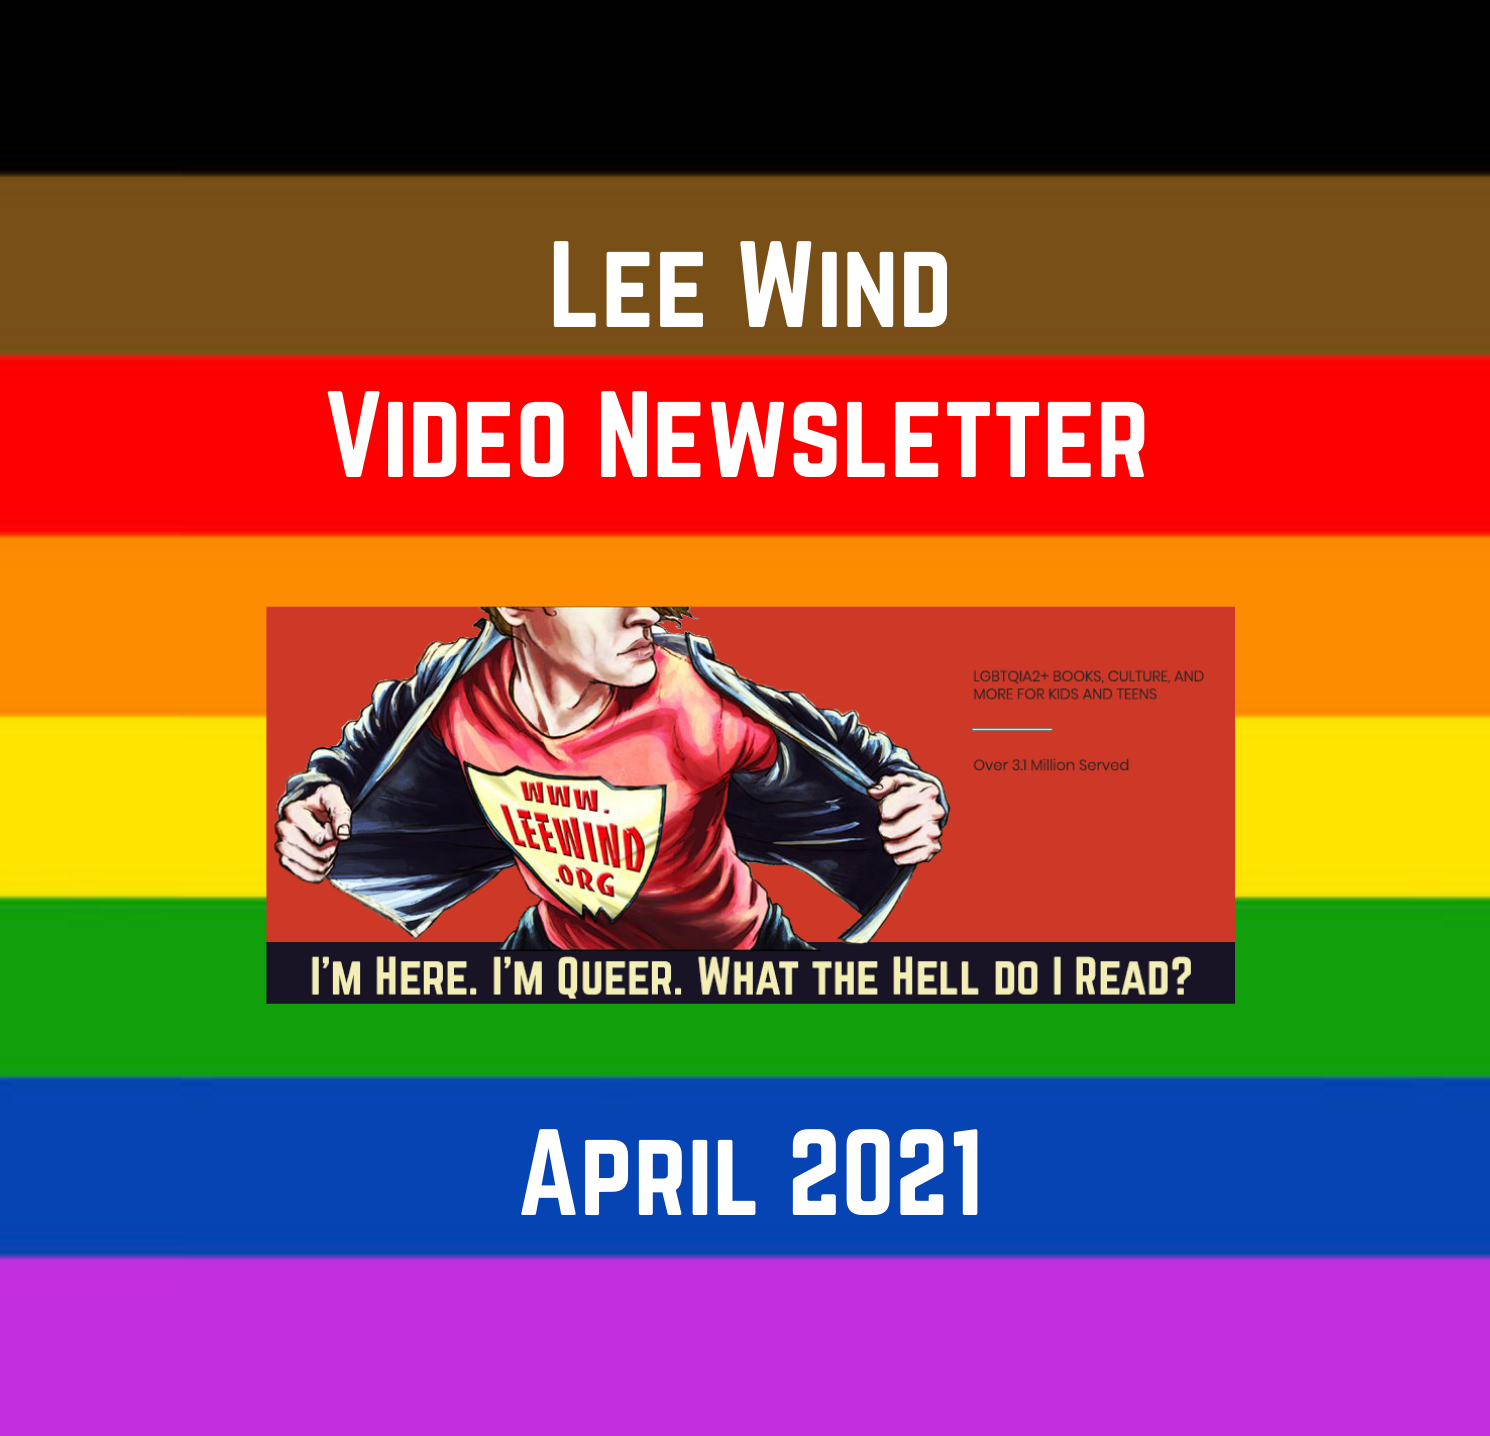 Graphic logo for the "Lee Wind Video Newsletter: April 2021" showing the diversity rainbow pride flag and the superhero logo of Lee's website, a man pulling back a denim shirt to reveal a superhero shield on his red T-shirt that reads: www.LeeWind.org